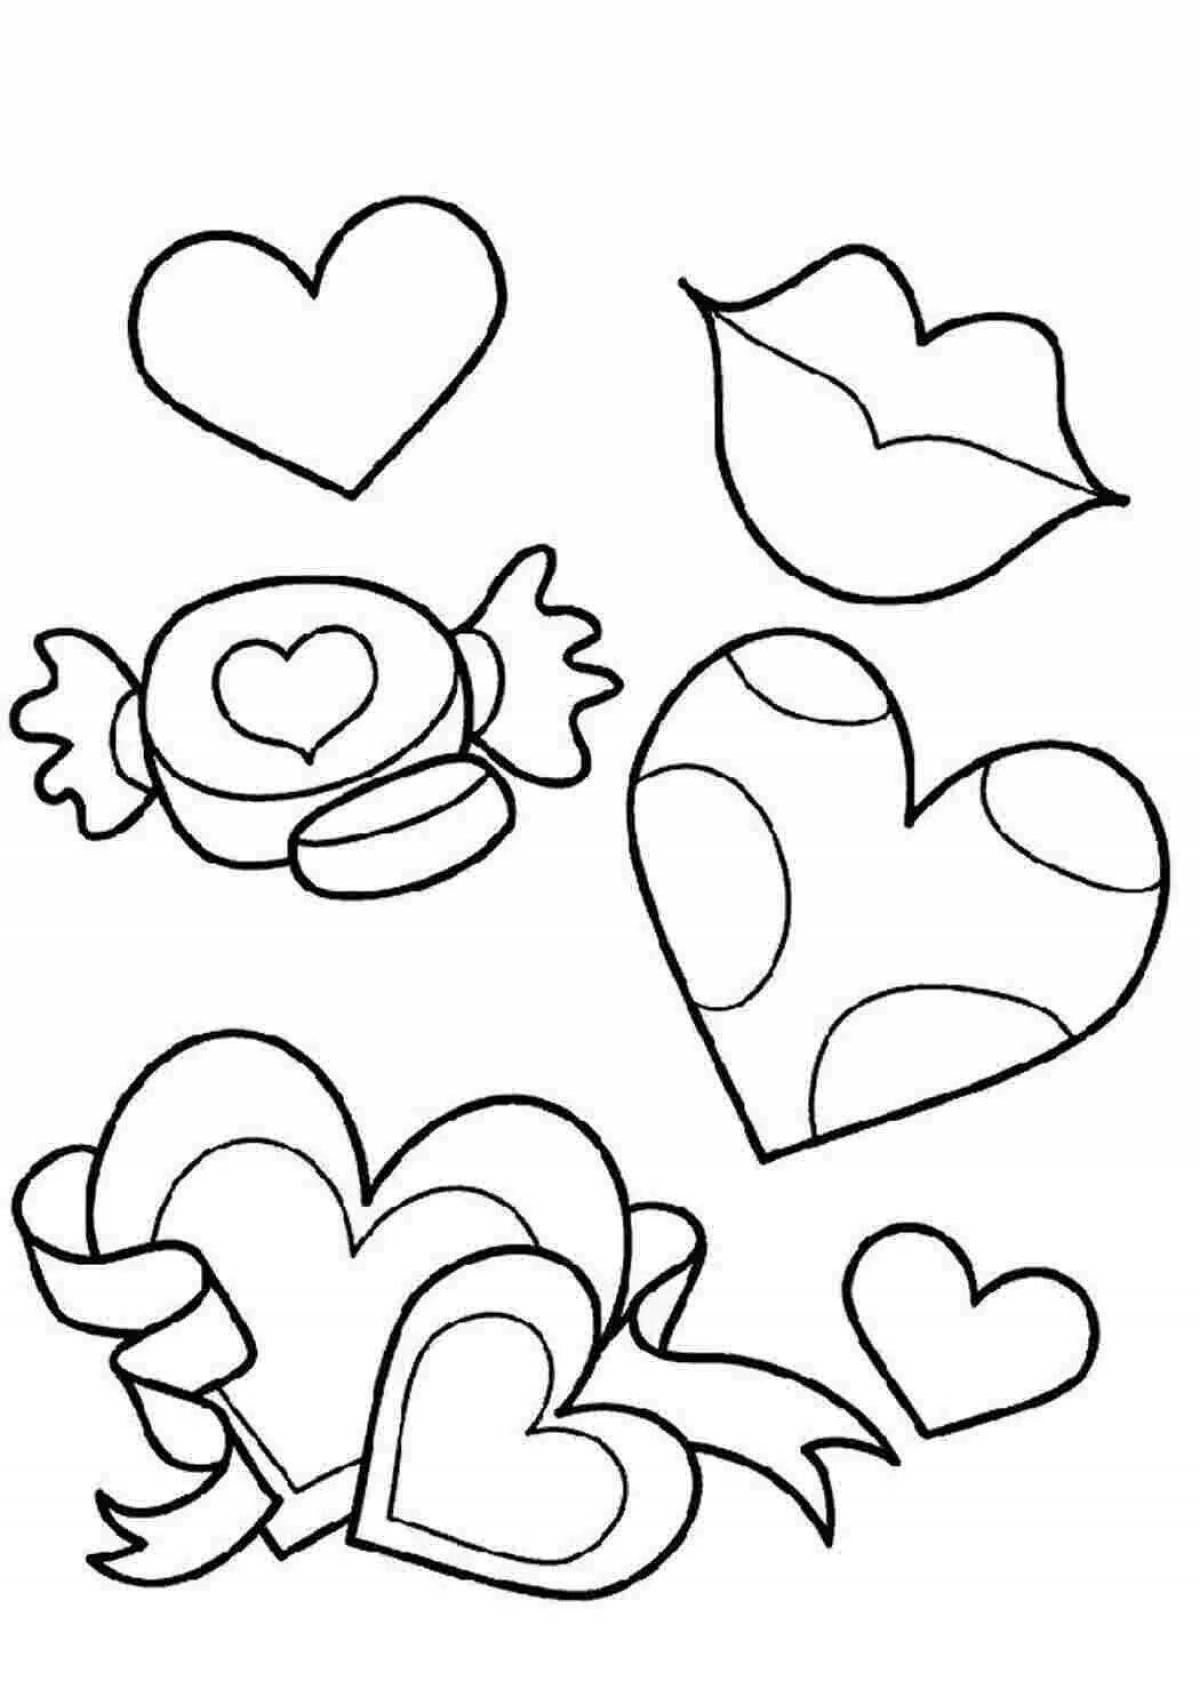 Great heart coloring card